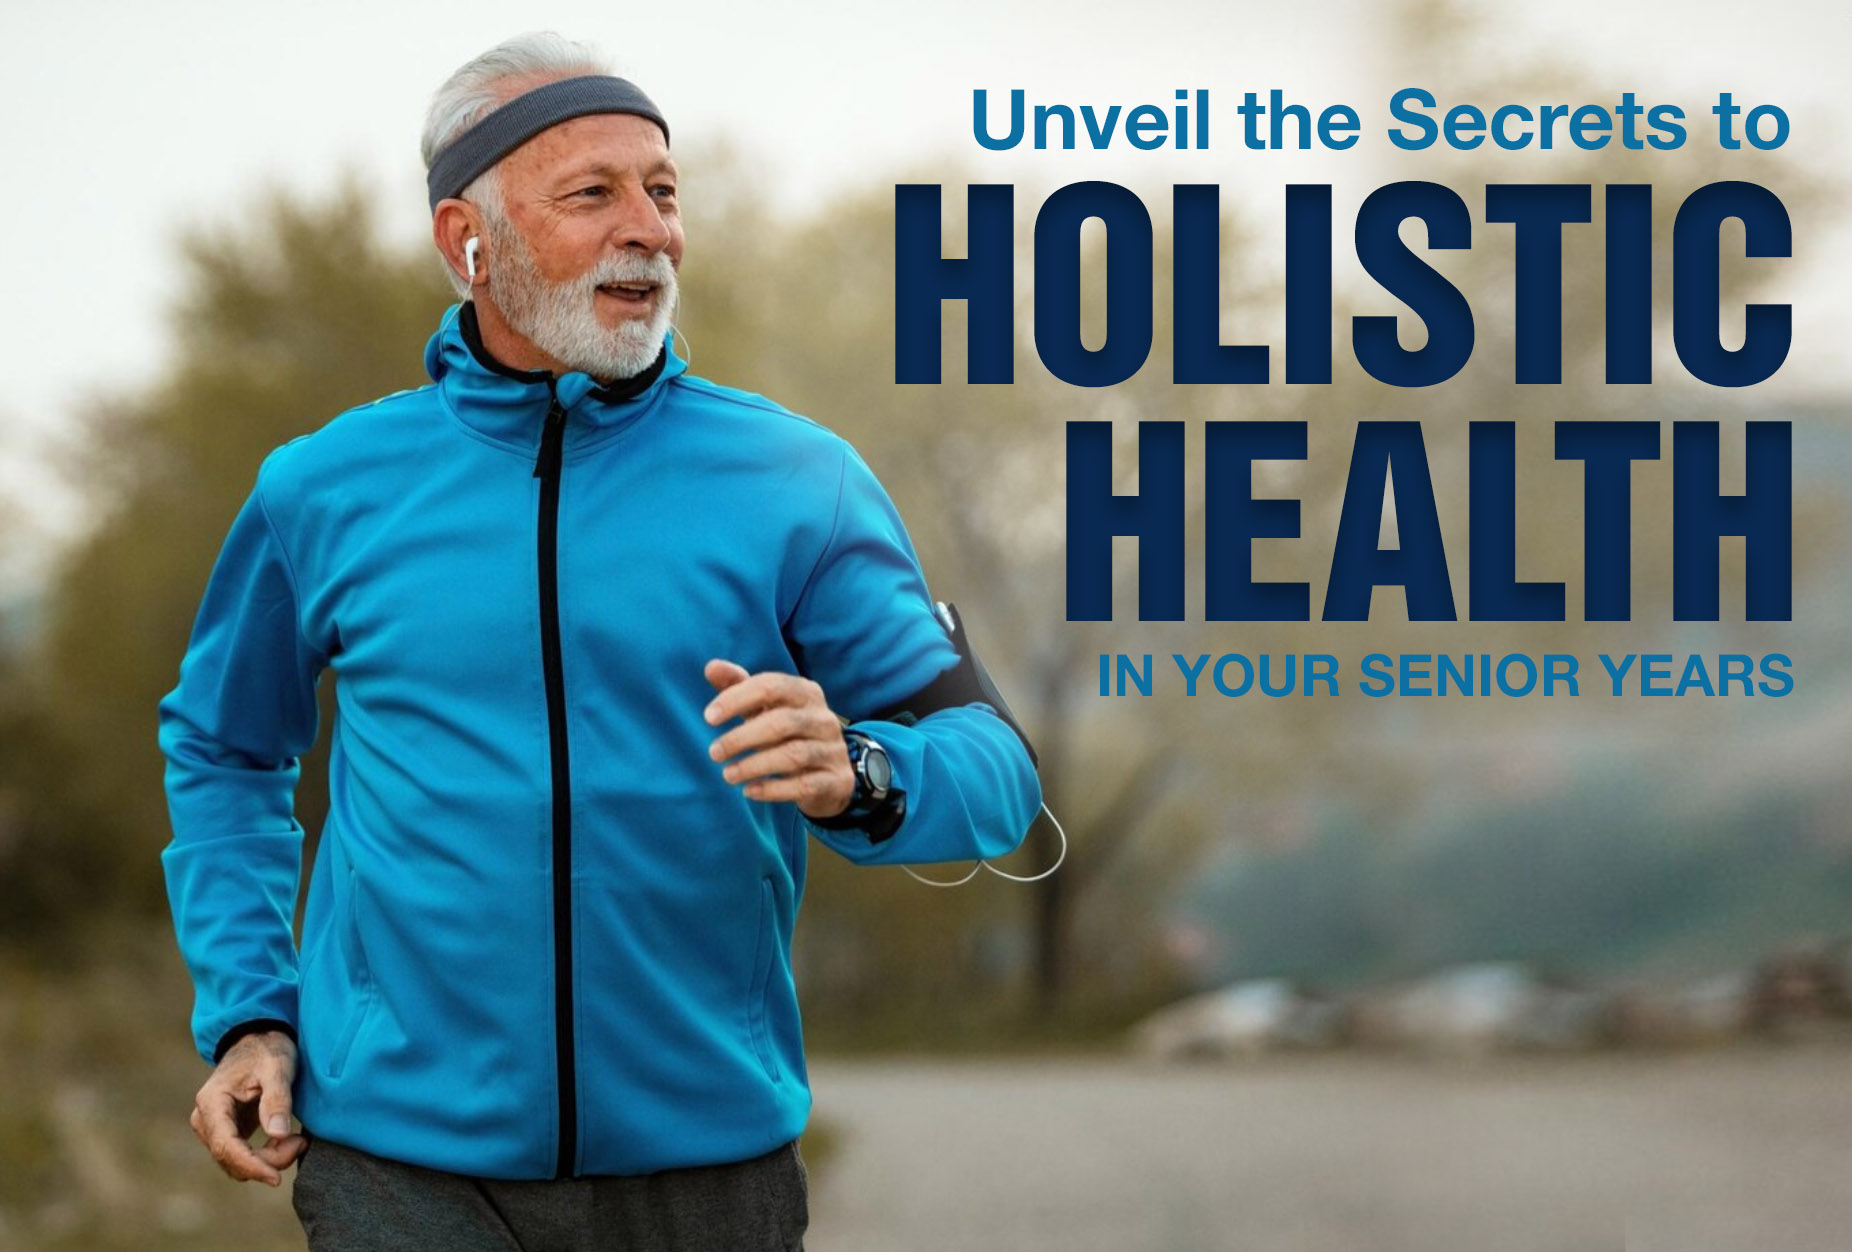 Unveil the Secrets to Holistic Health in Your Senior Years